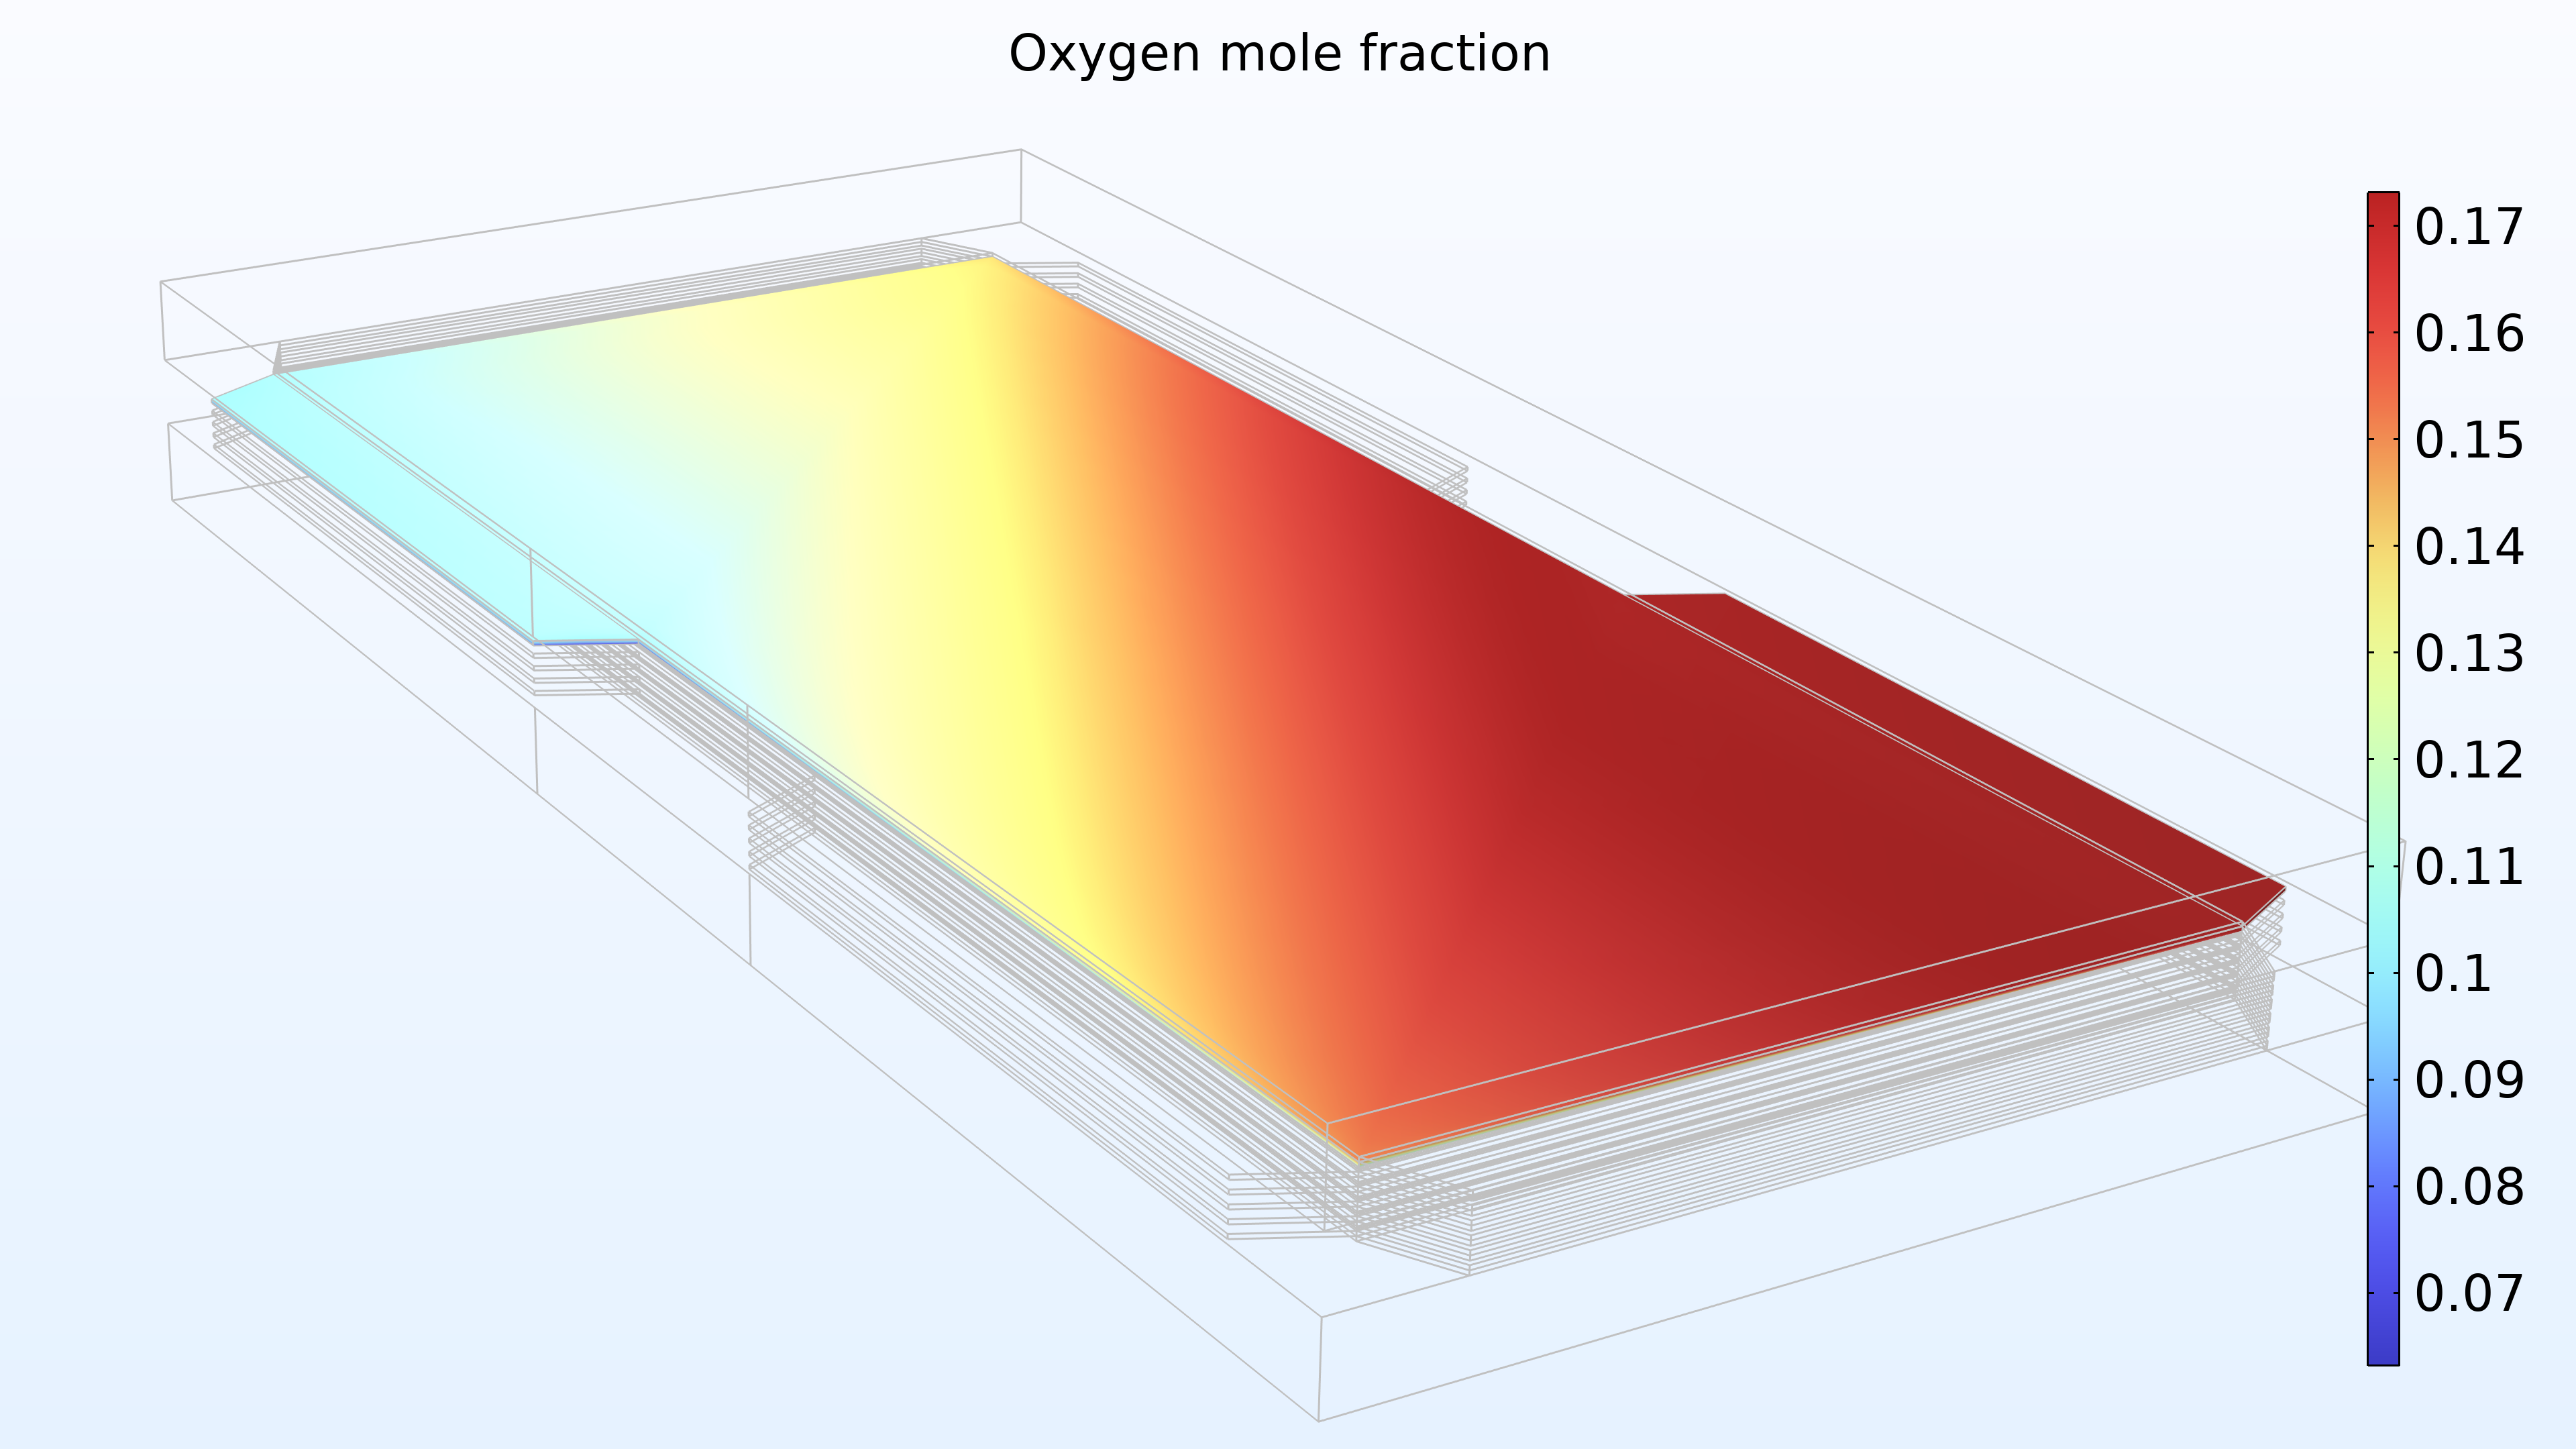 A plot showing the oxygen mole fraction with the rainbow color scale, where the leftmost side of the model is light blue and yellow; the middle is yellow, red, and orange; and the rightmost side is dark red.